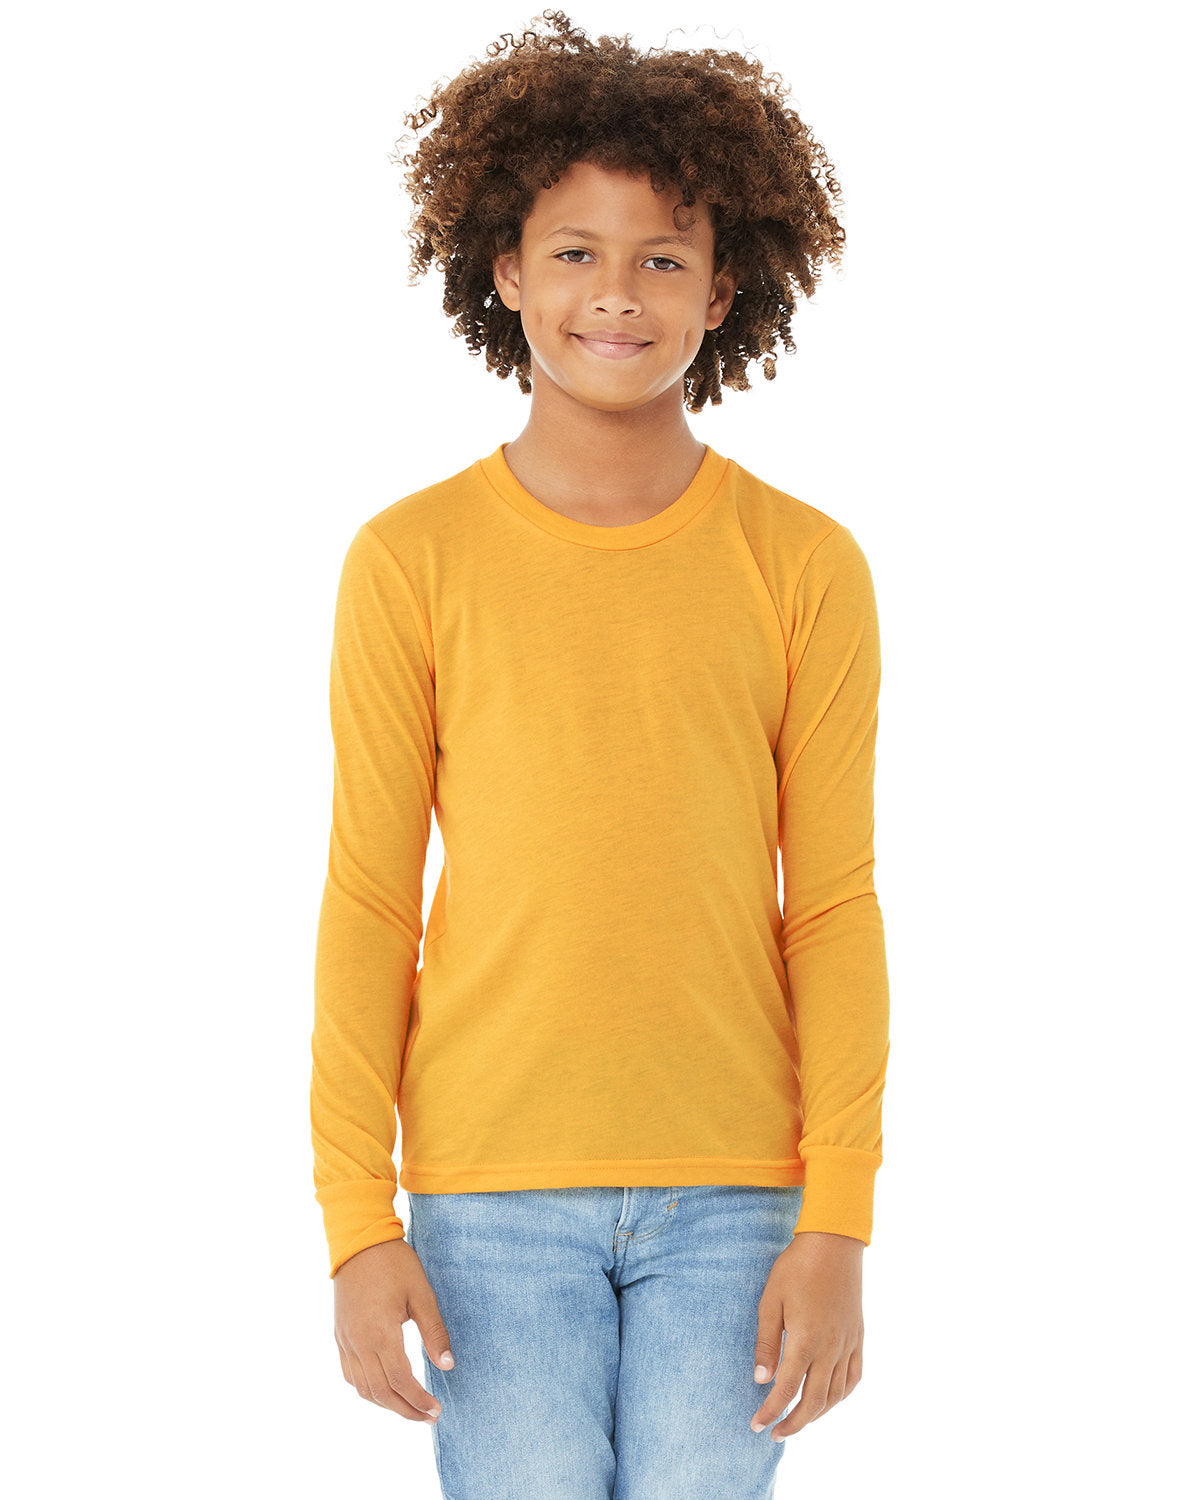 UNLEASH-THEIR-STYLE-AND-COMFORT-WITH-THE-BELLA-CANVAS-YOUTH-JERSEY-LONG-SLEEVE-T-SHIRT